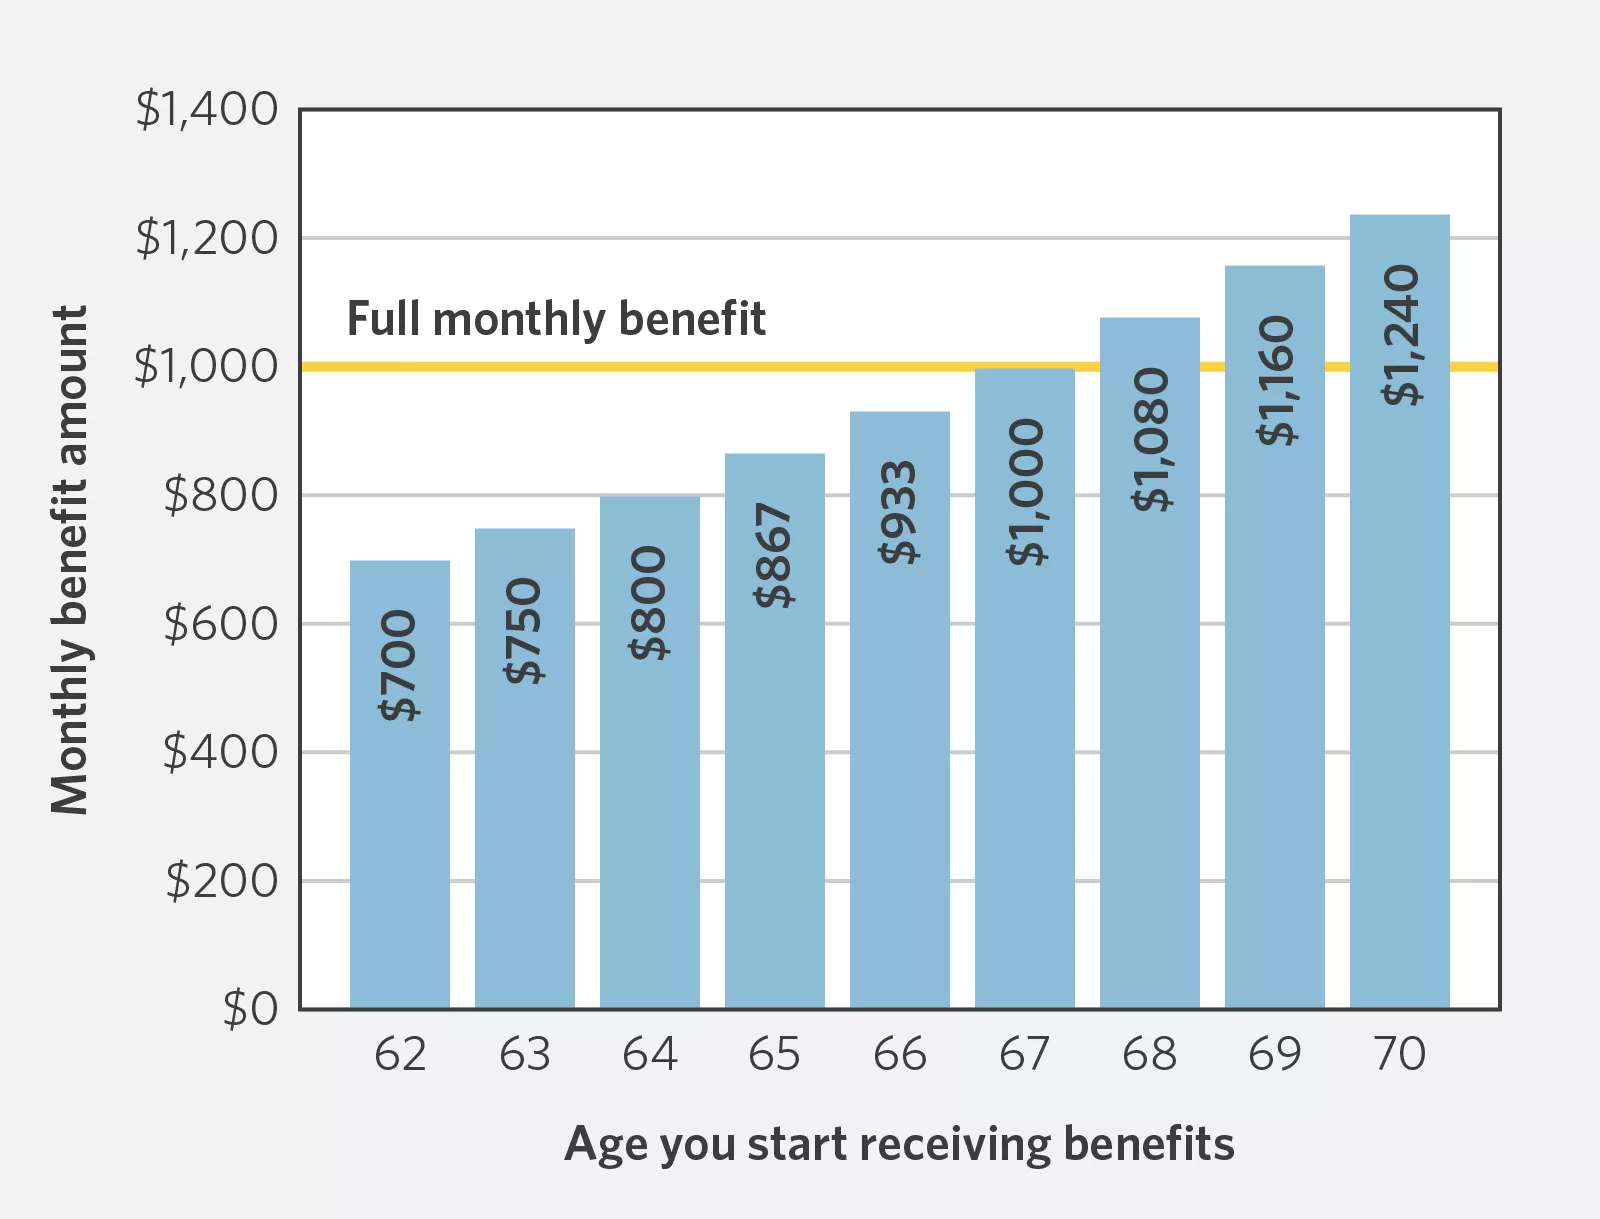  Chart showing how monthly benefit amounts differ based on age you start receiving benefits.
